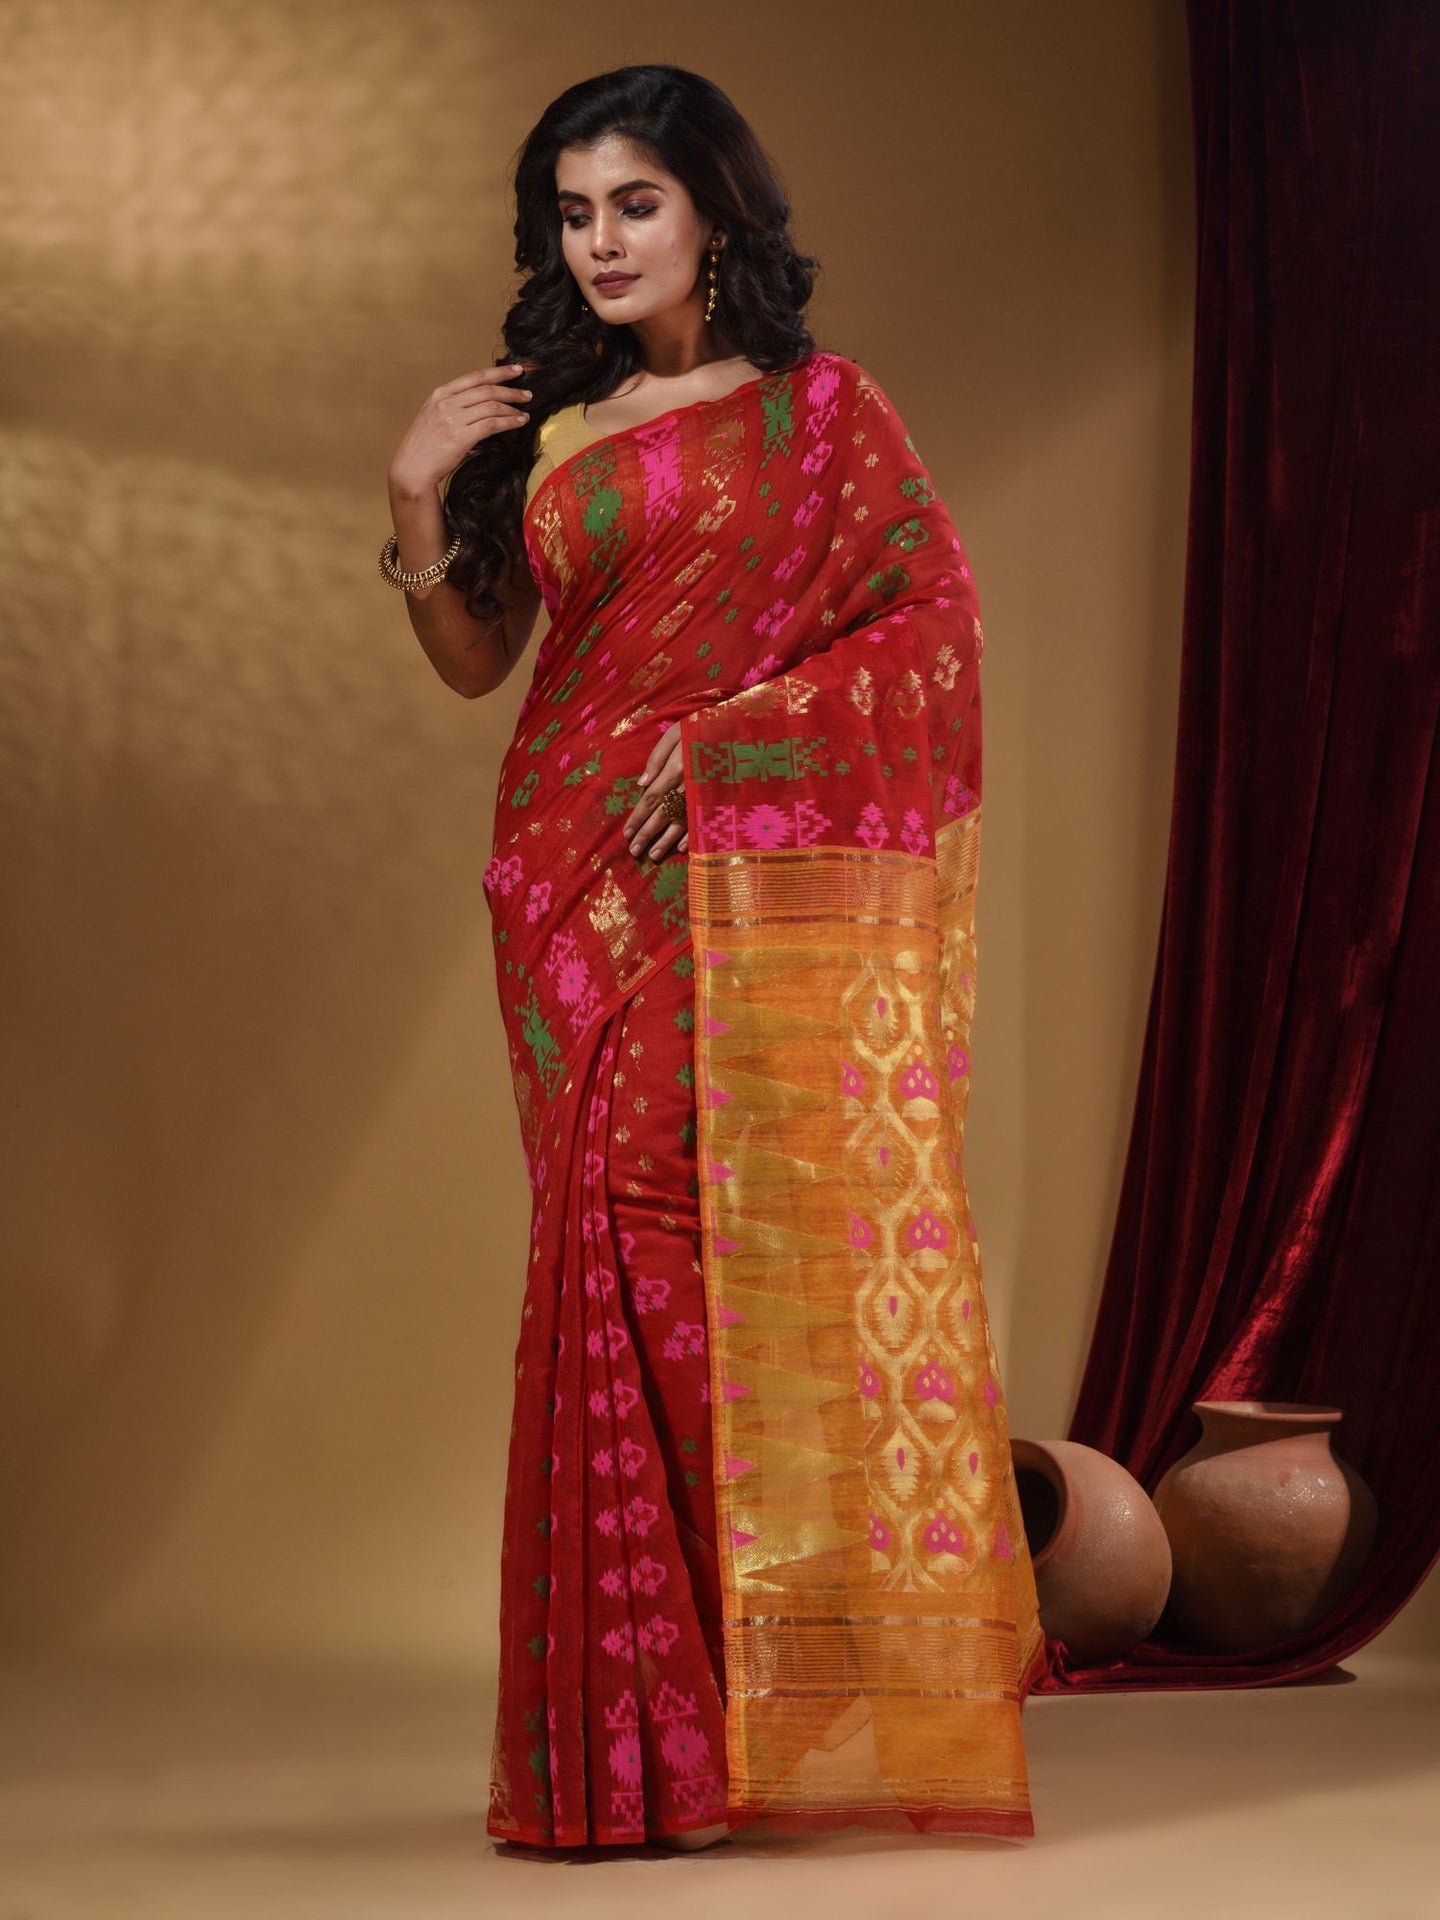 Red Cotton Handwoven Jamdani Saree With Multicolor Designs And Motifs